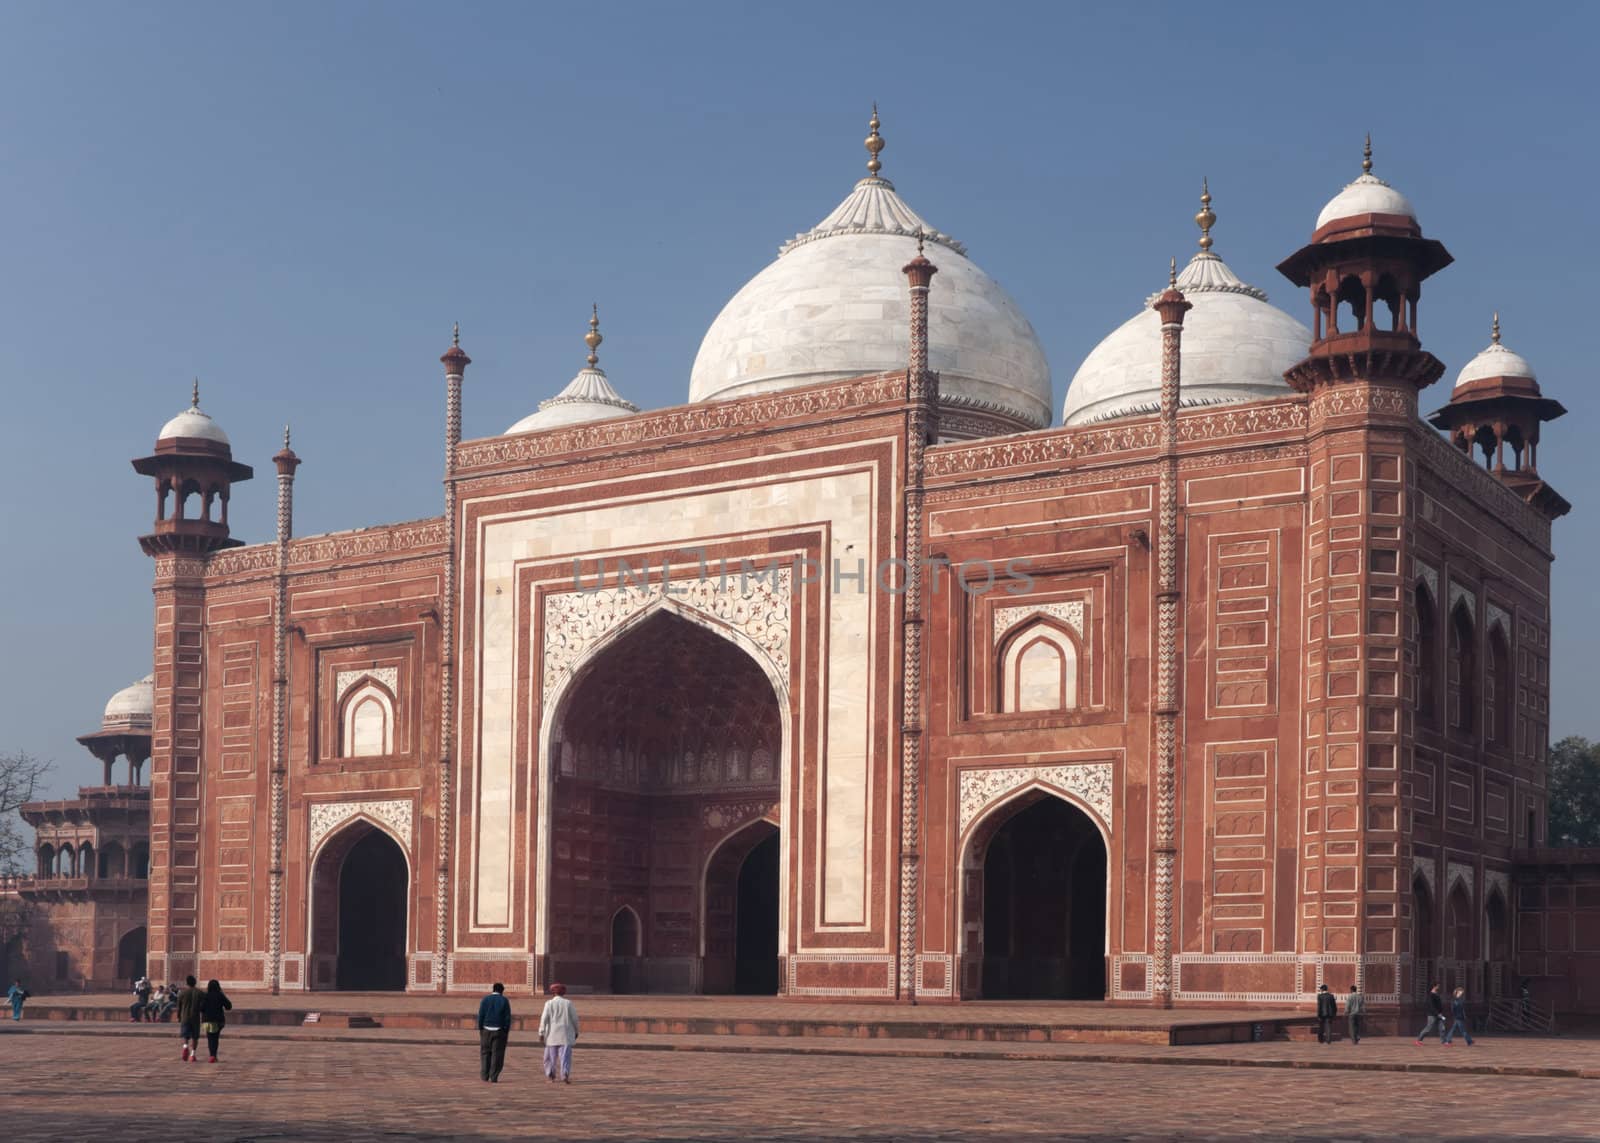 Mosque at the Taj Mahal mausoleum in India's Agra. by Claudine